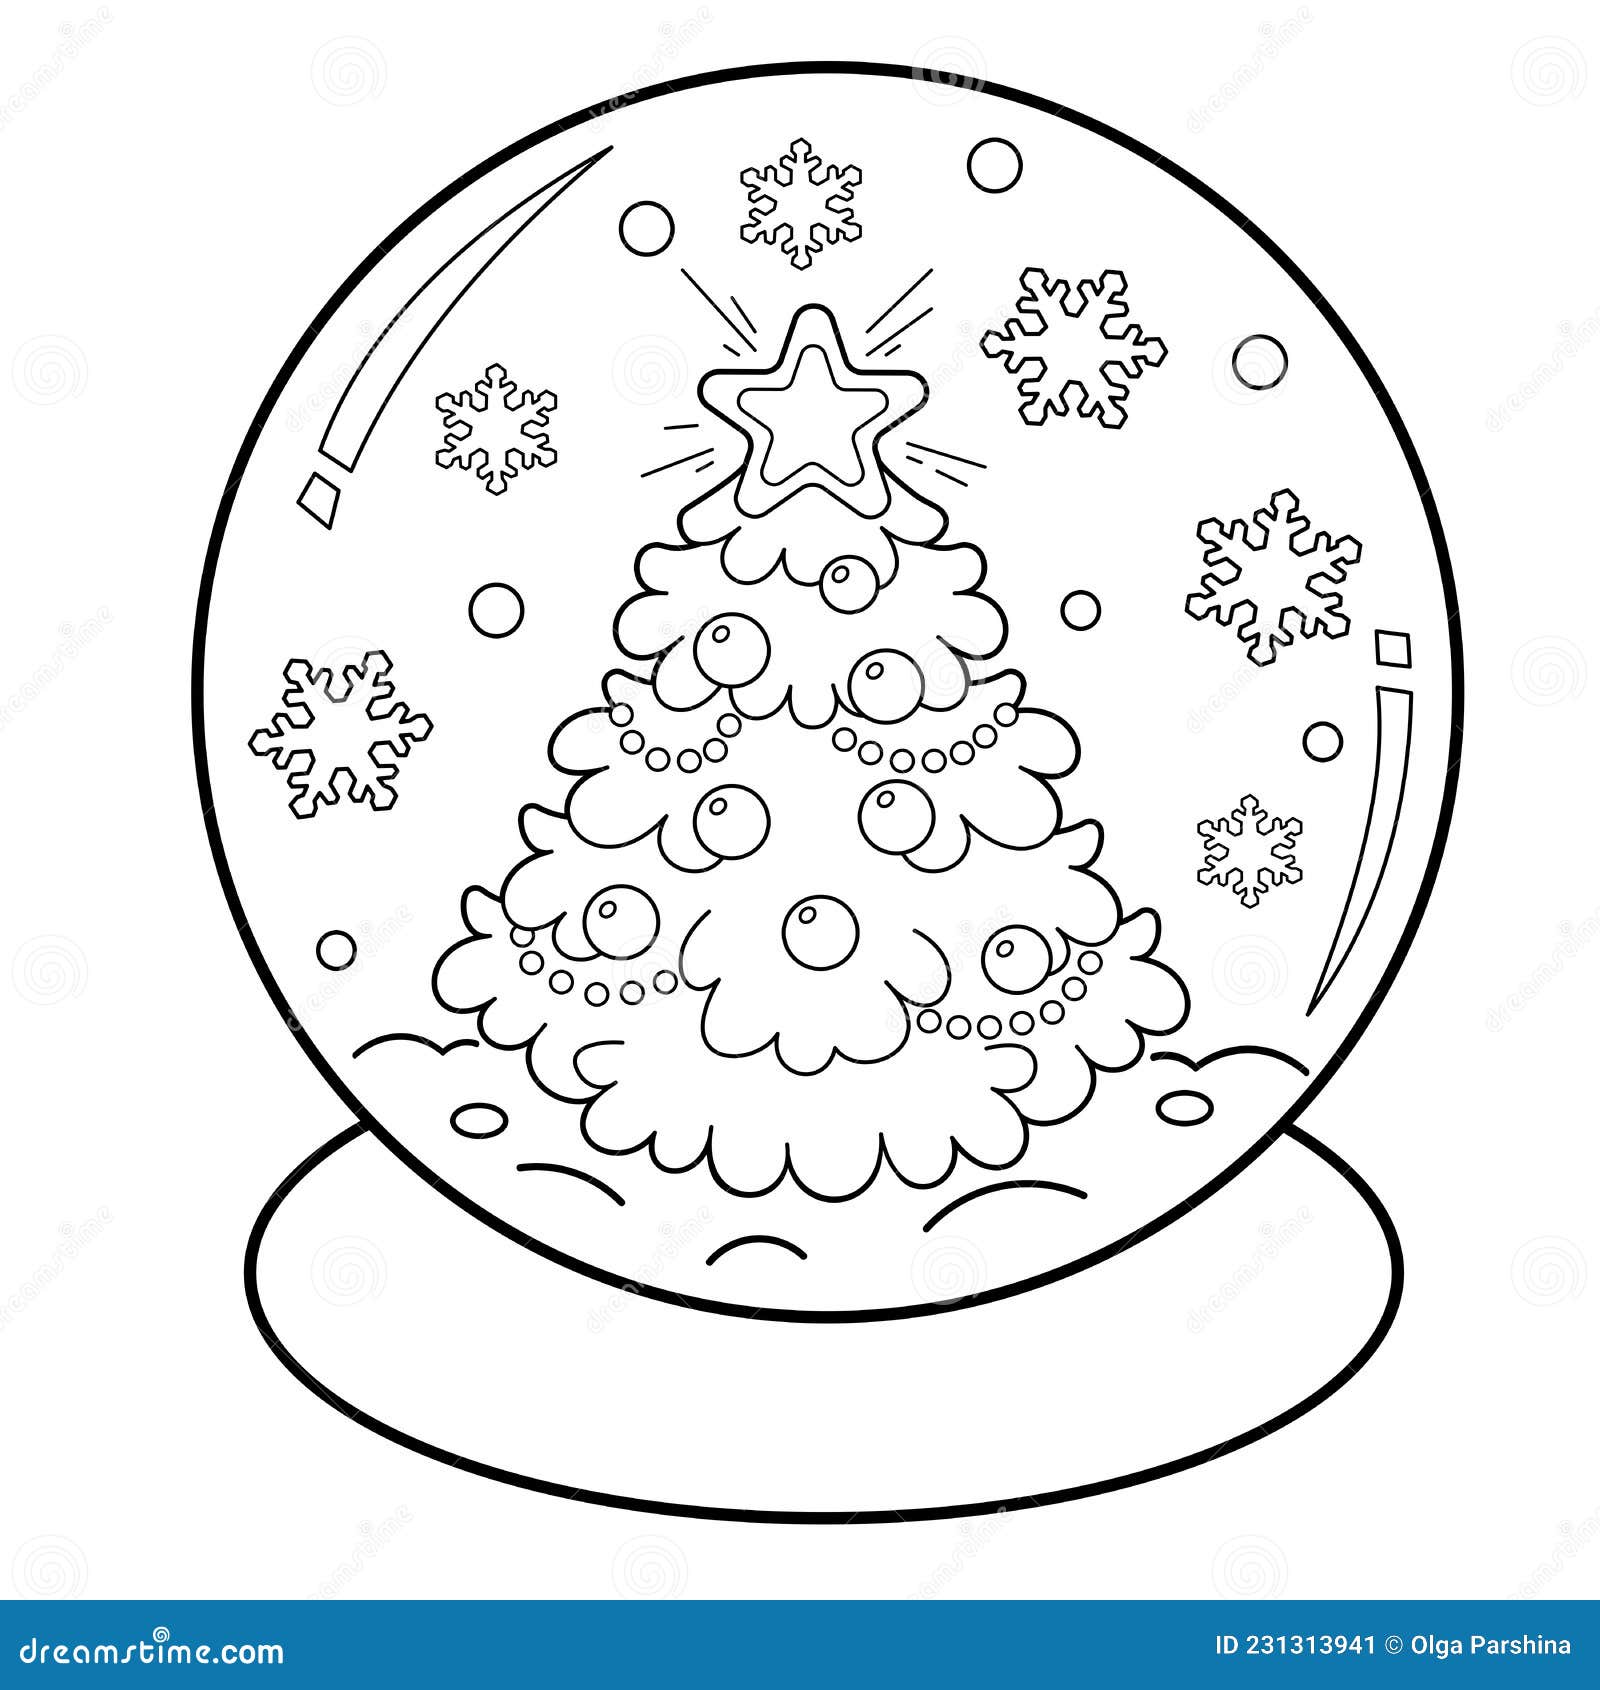 Coloring page outline of snow globe with christmas tree new year christmas stock vector